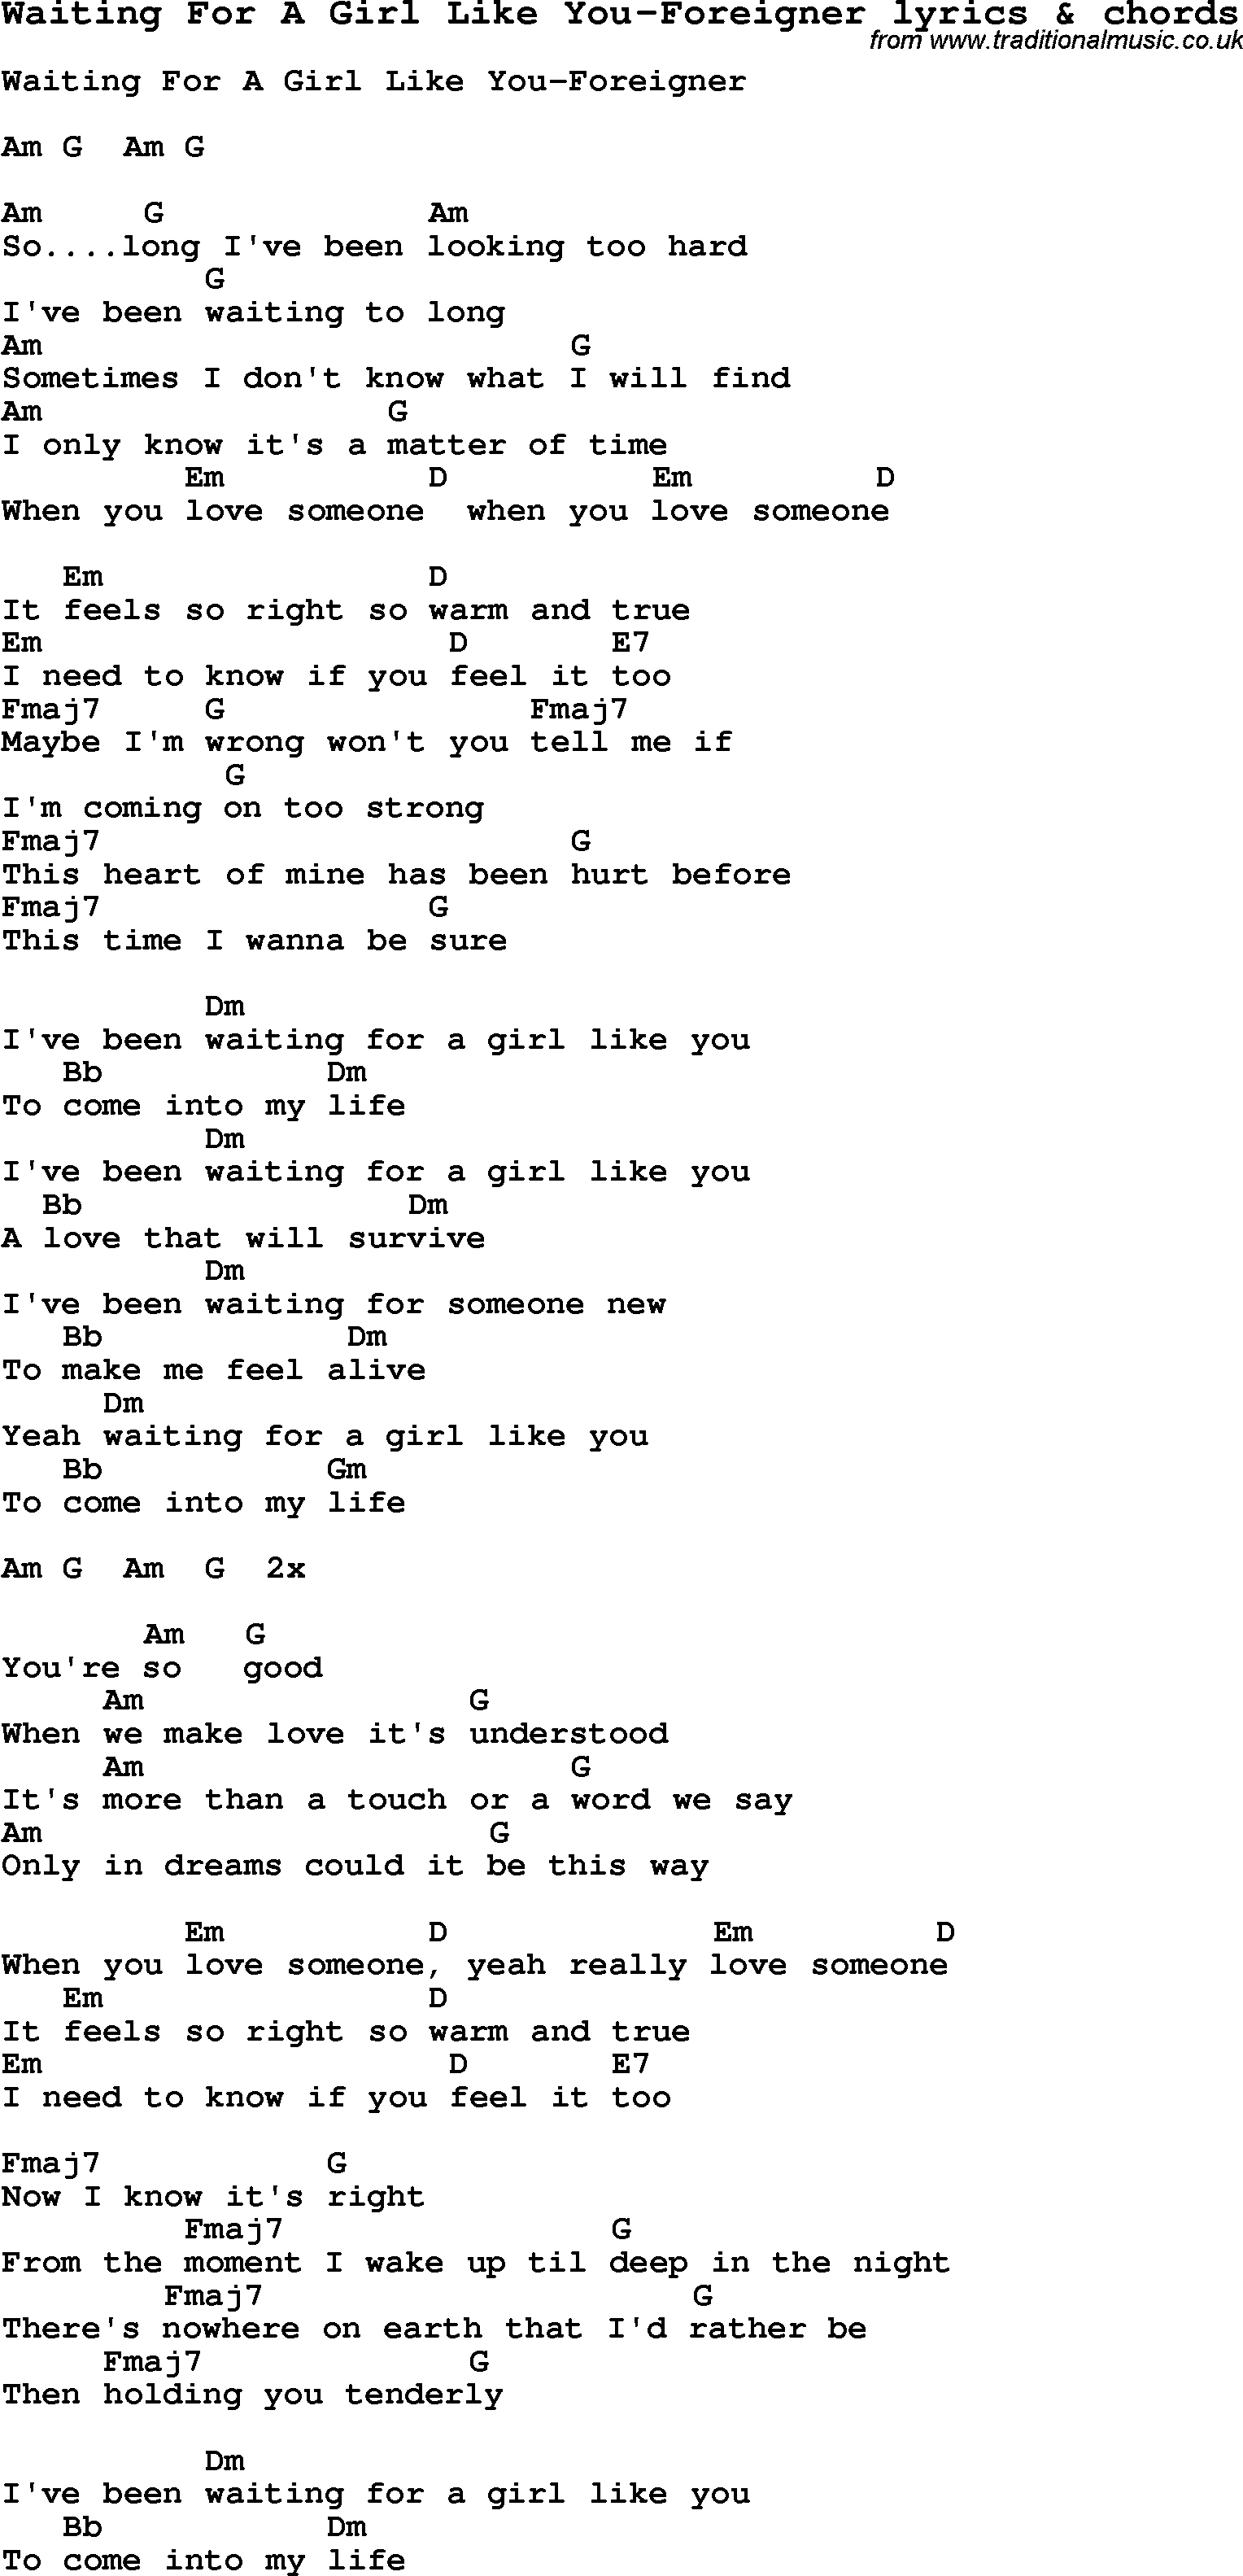 Someone Like You Chords Love Song Lyrics Forwaiting For A Girl Like You Foreigner With Chords